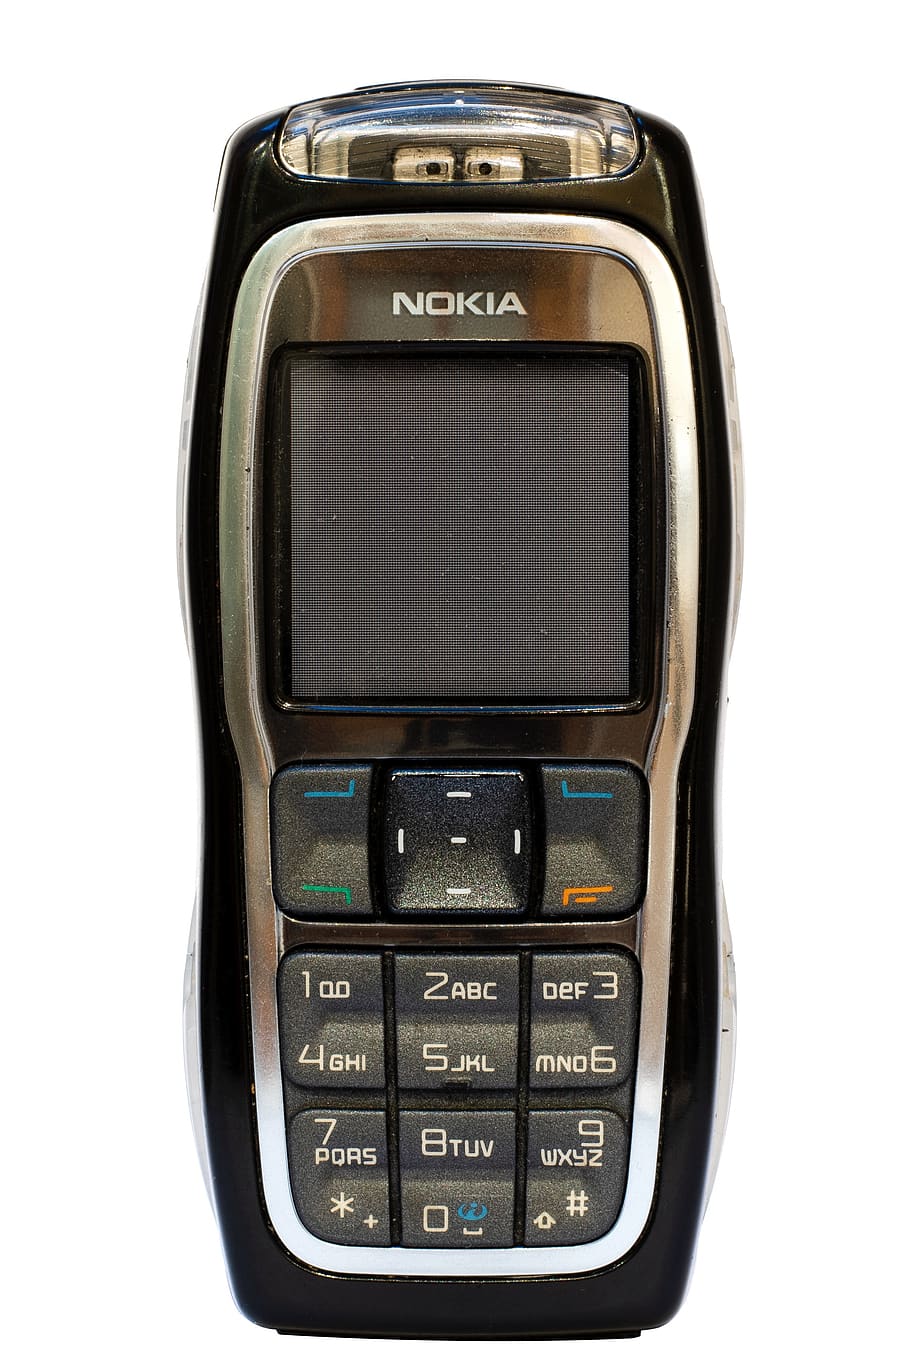 nokia, 3220, nokia 3220, cell, mobile, phone, the device, cellular, technology, call